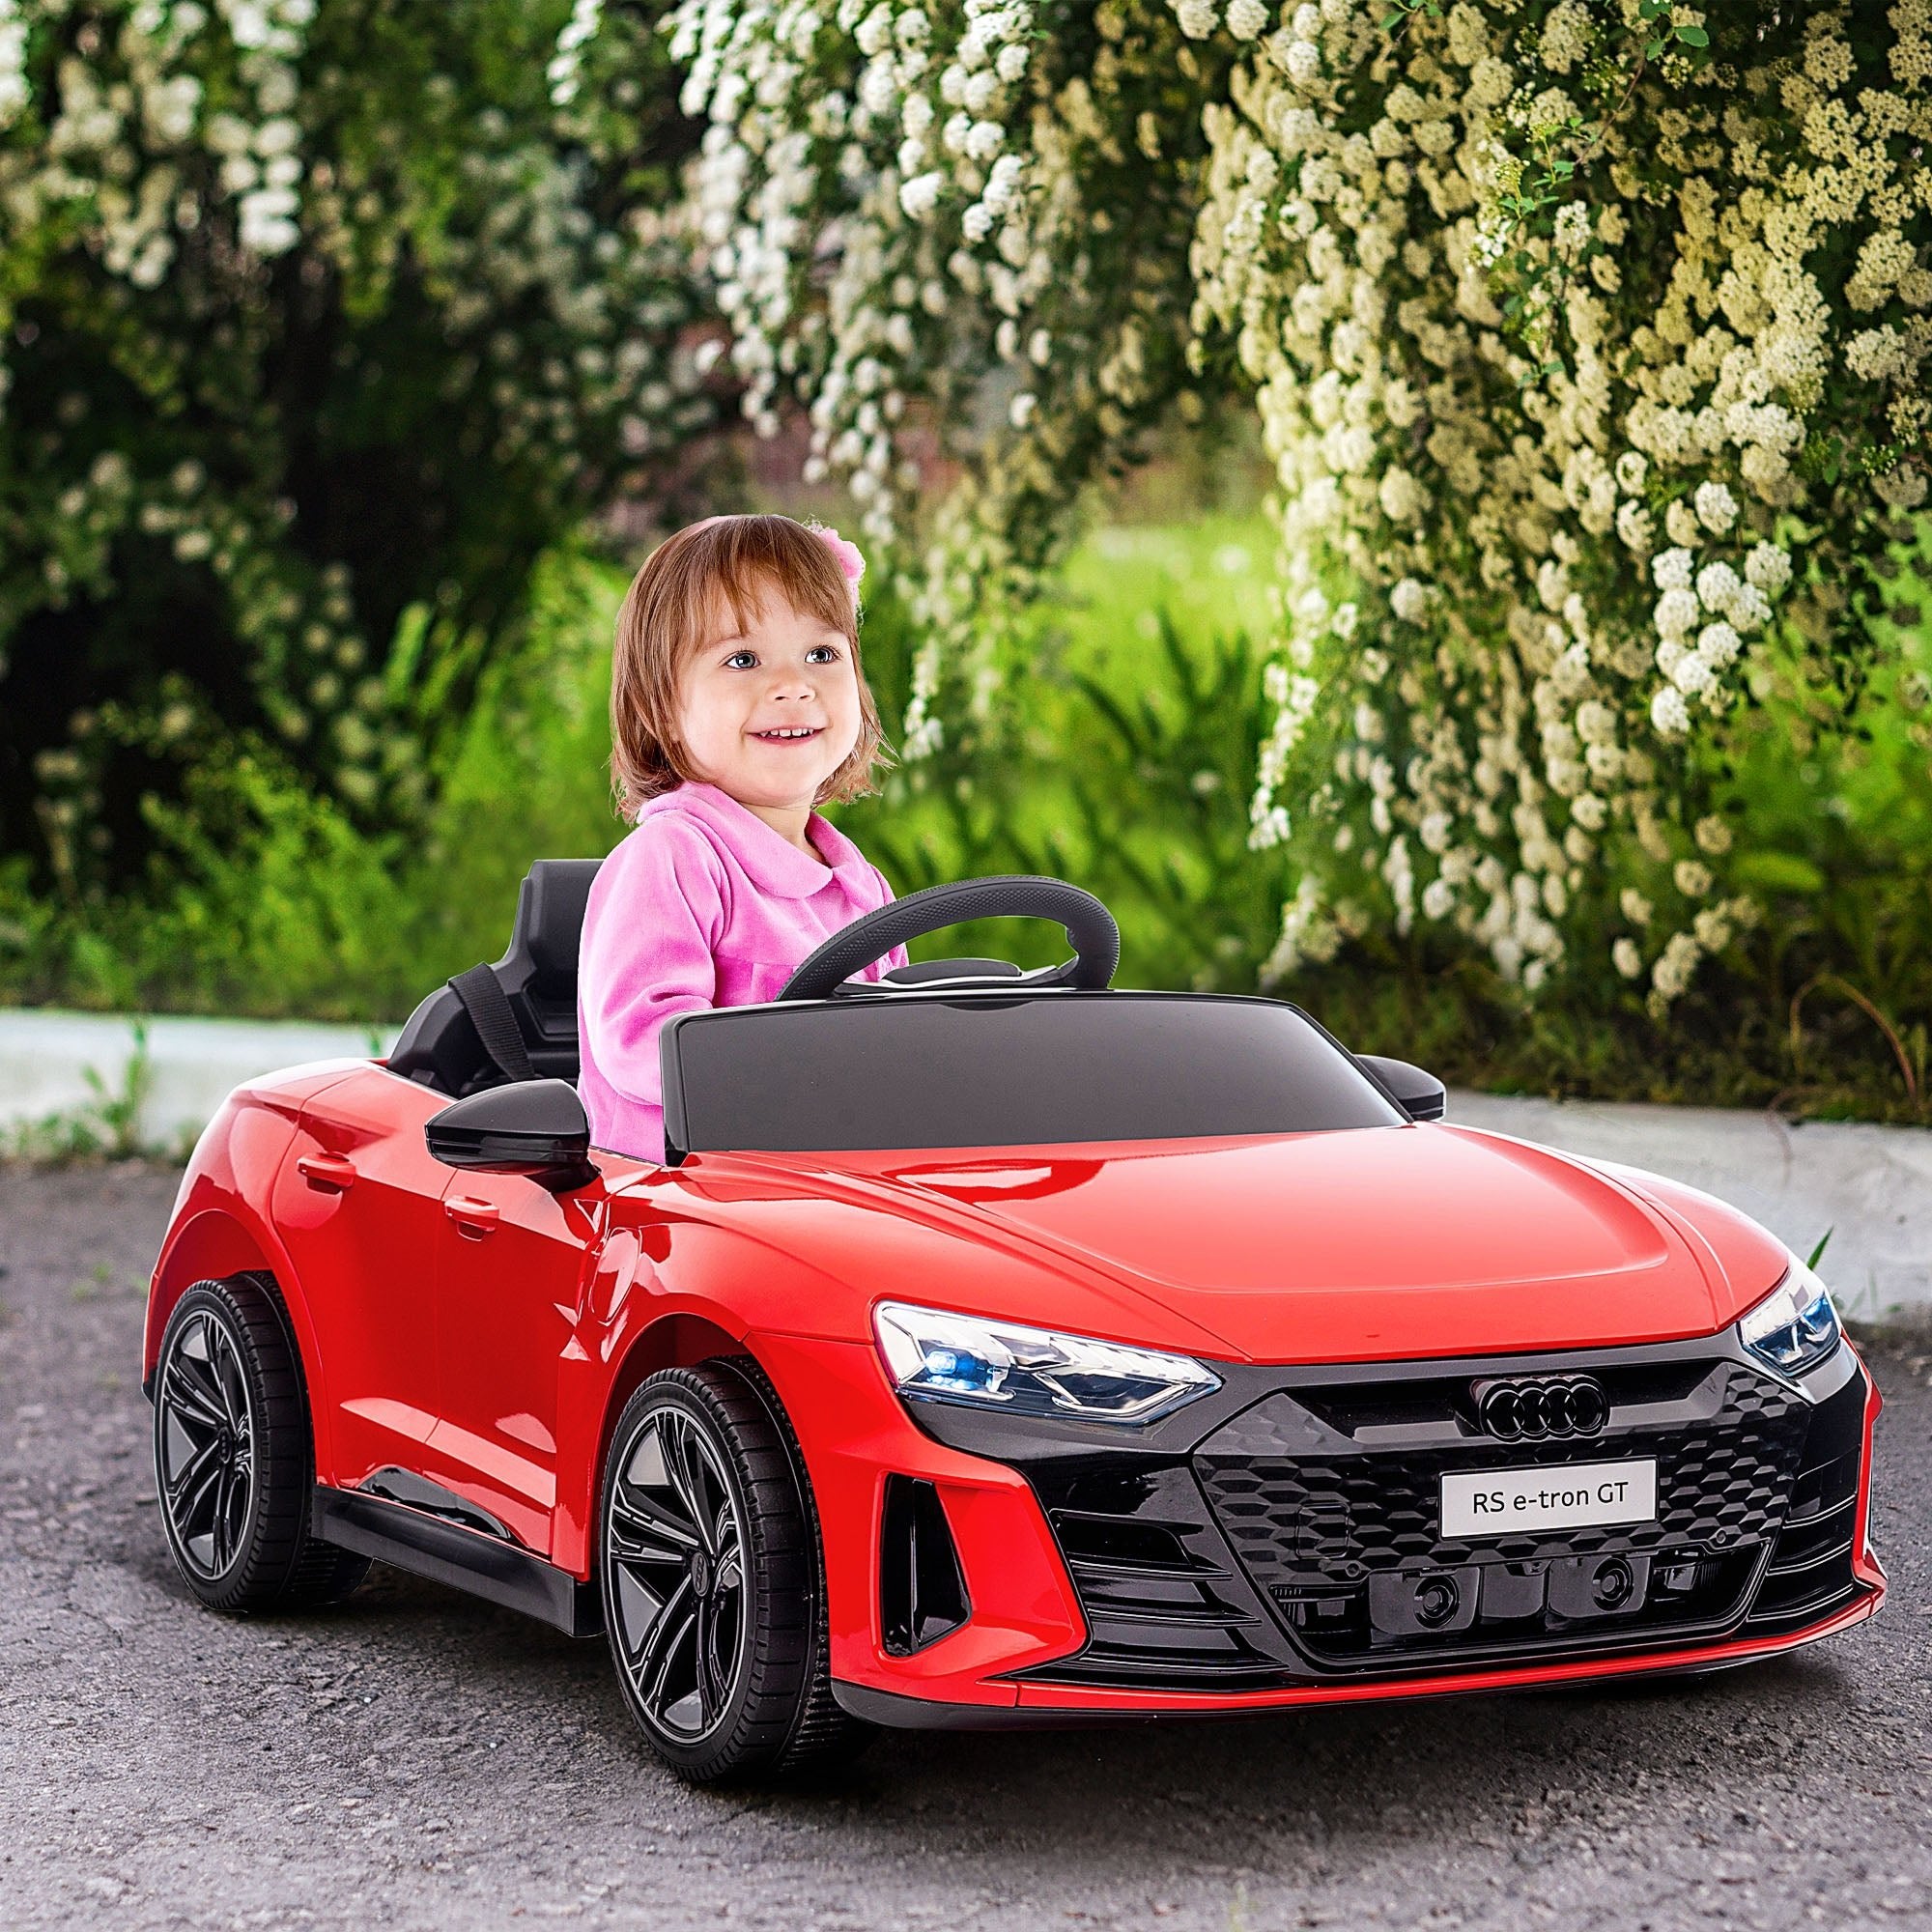 HOMCOM Audi Licensed 12V Kids Electric Ride-On, with Remote Control, Suspension System, Lights, Music, Motor - Red - TovaHaus